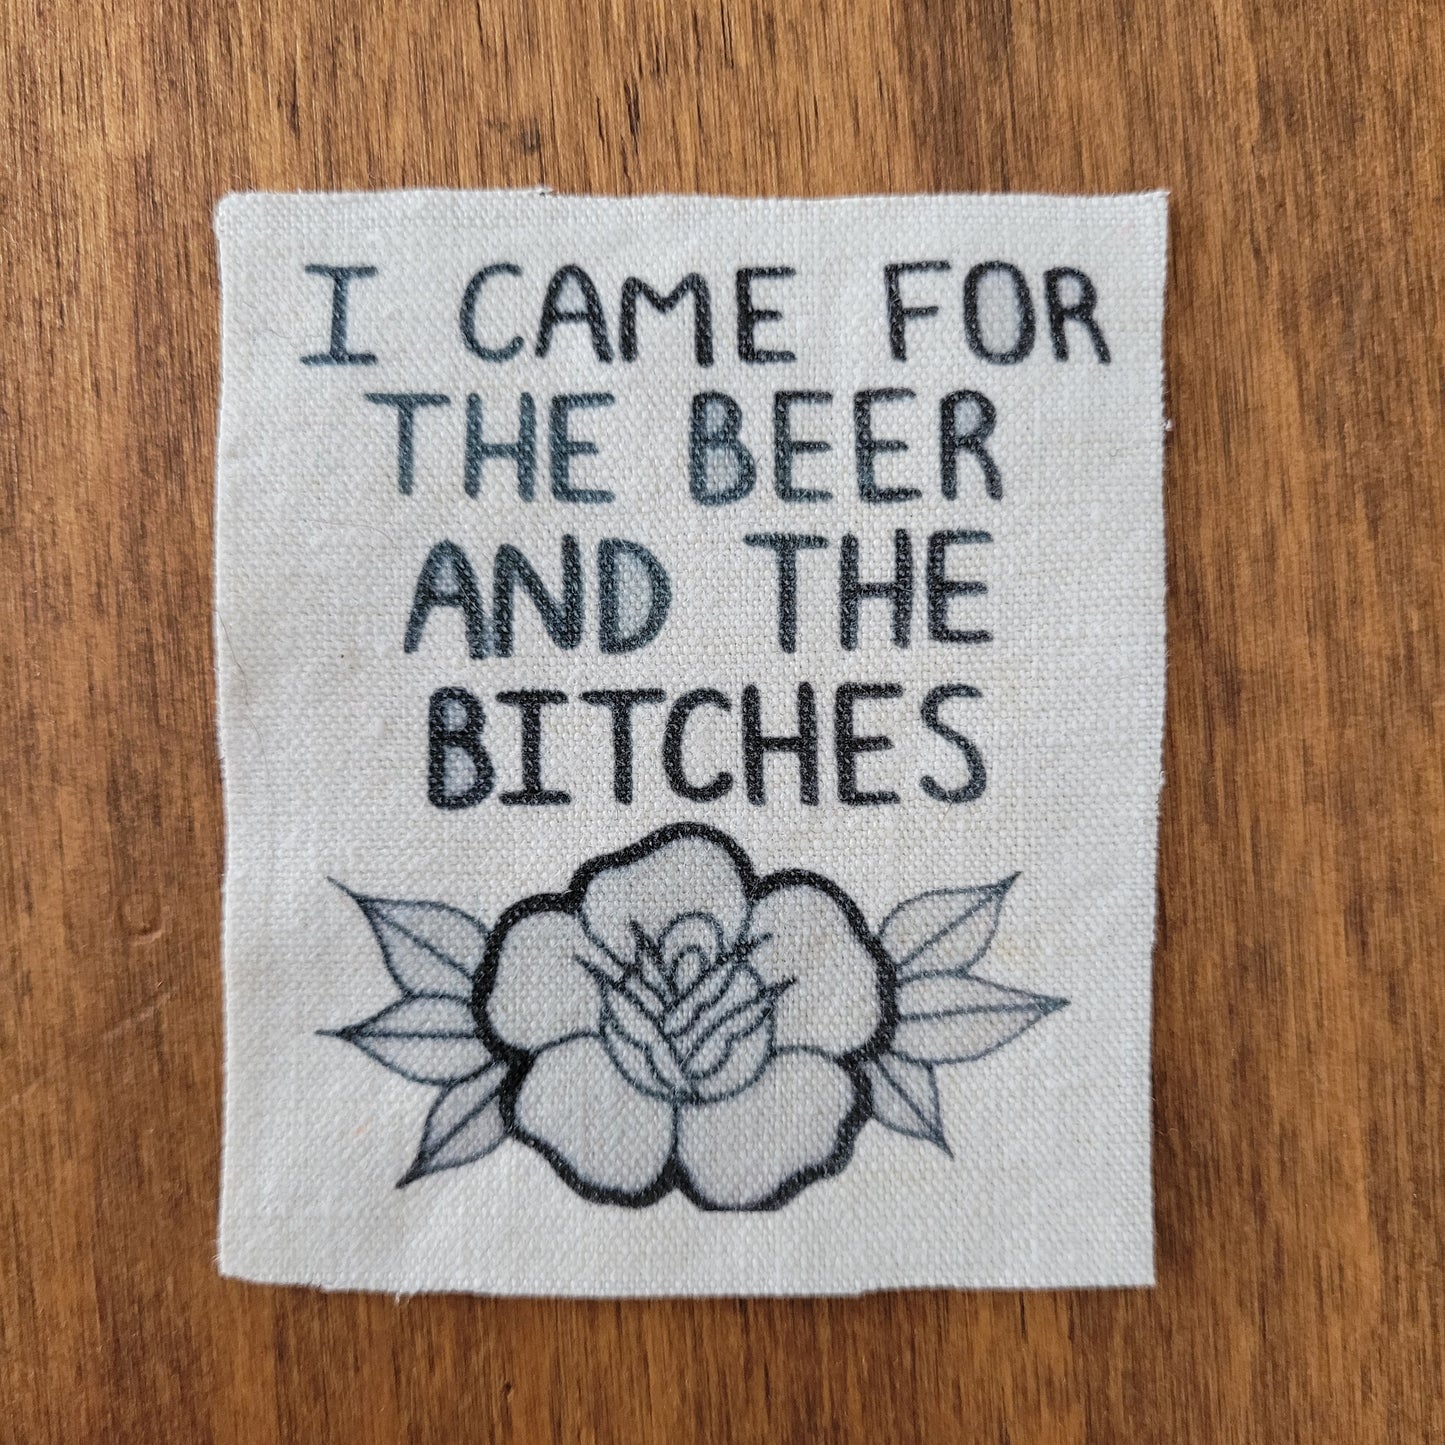 Beer and bitches